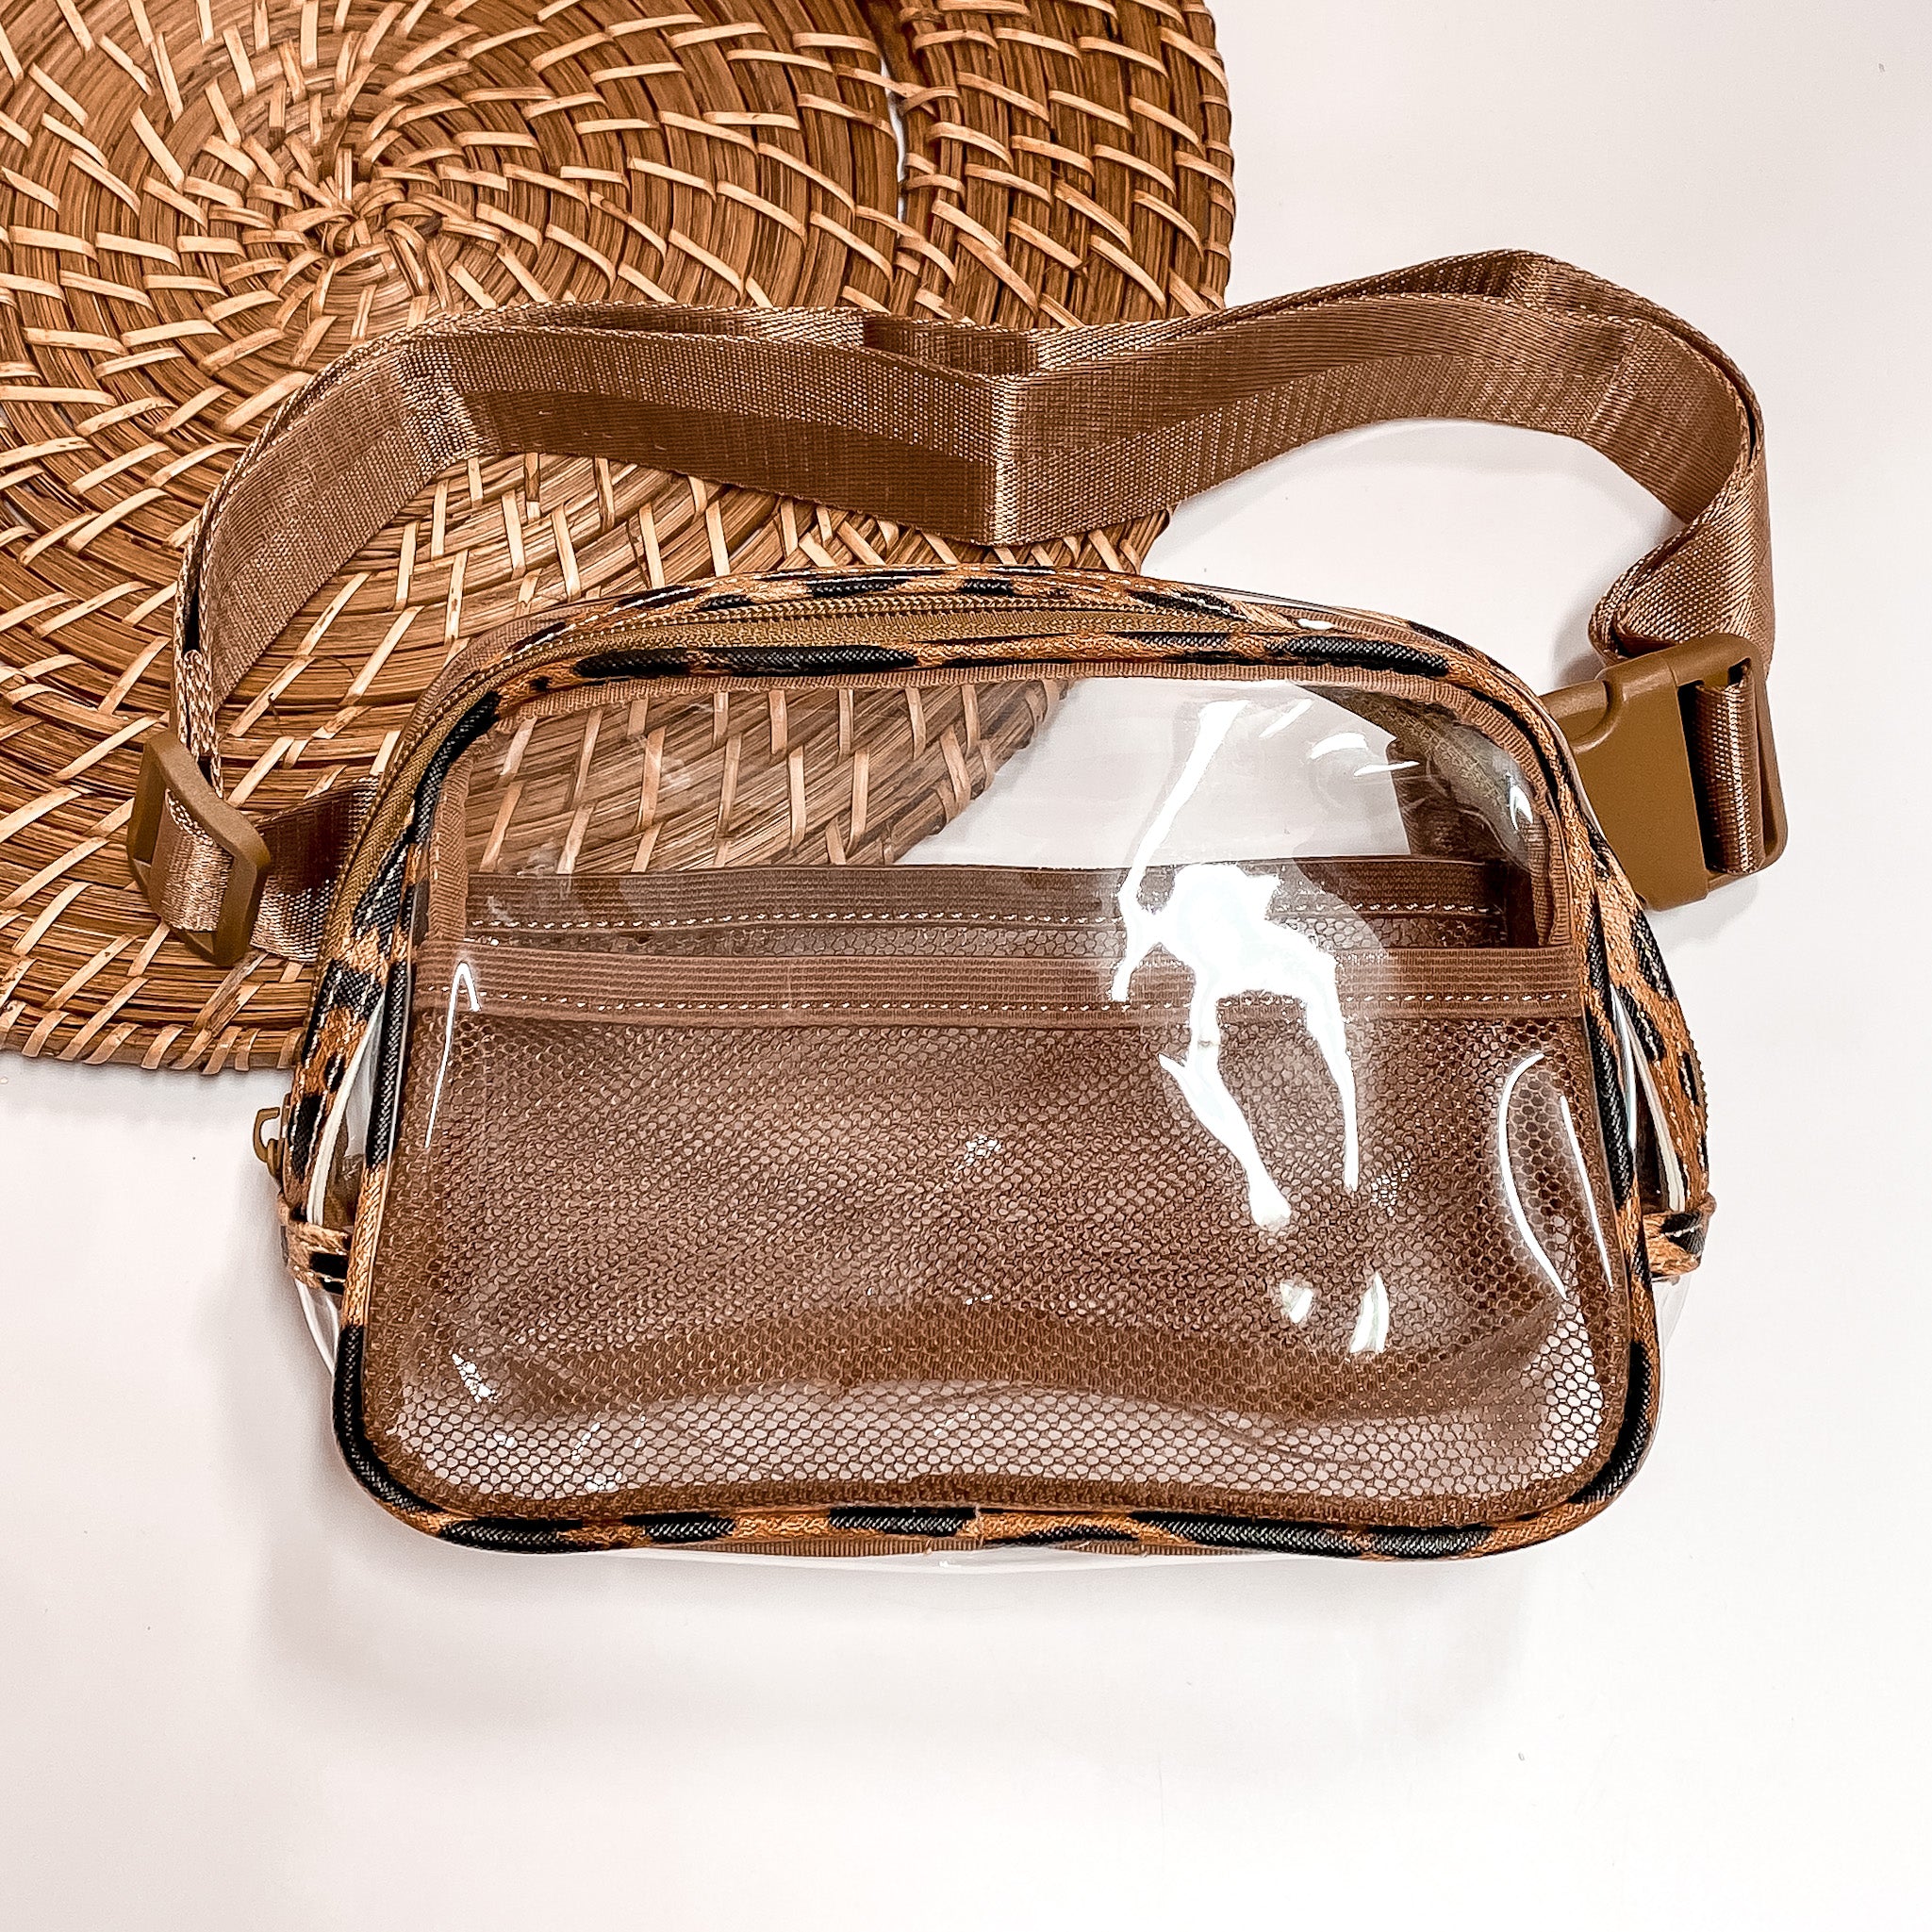 Pictured is a rectangle clear fanny pack with a leopard print outline. This bag also includes a tan strap, tan accents, and tan mesh pockets. This bag is pictured on a white and brown patterned background. 